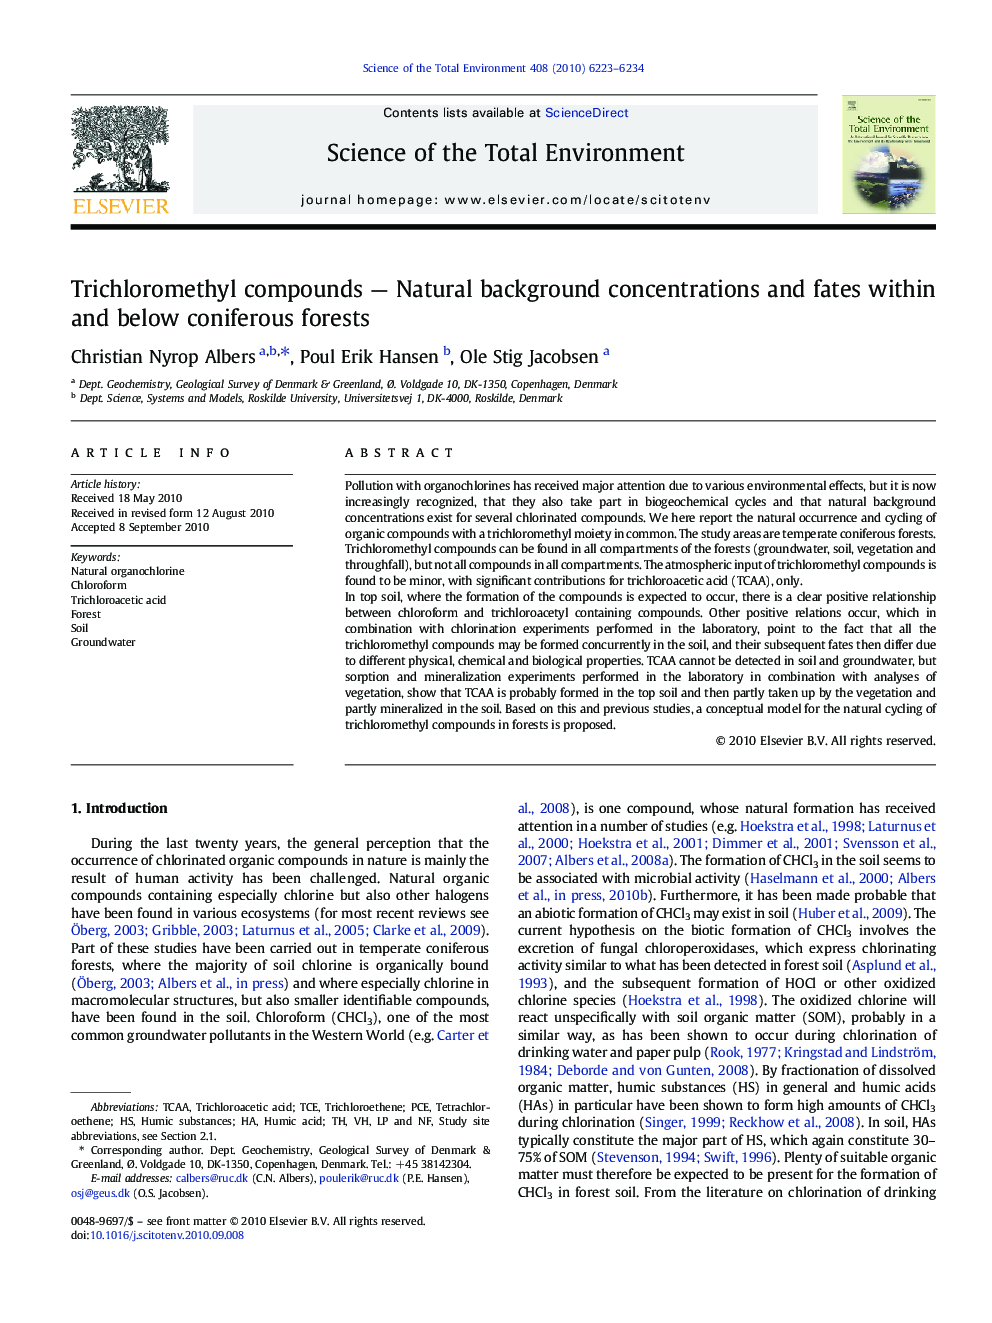 Trichloromethyl compounds - Natural background concentrations and fates within and below coniferous forests